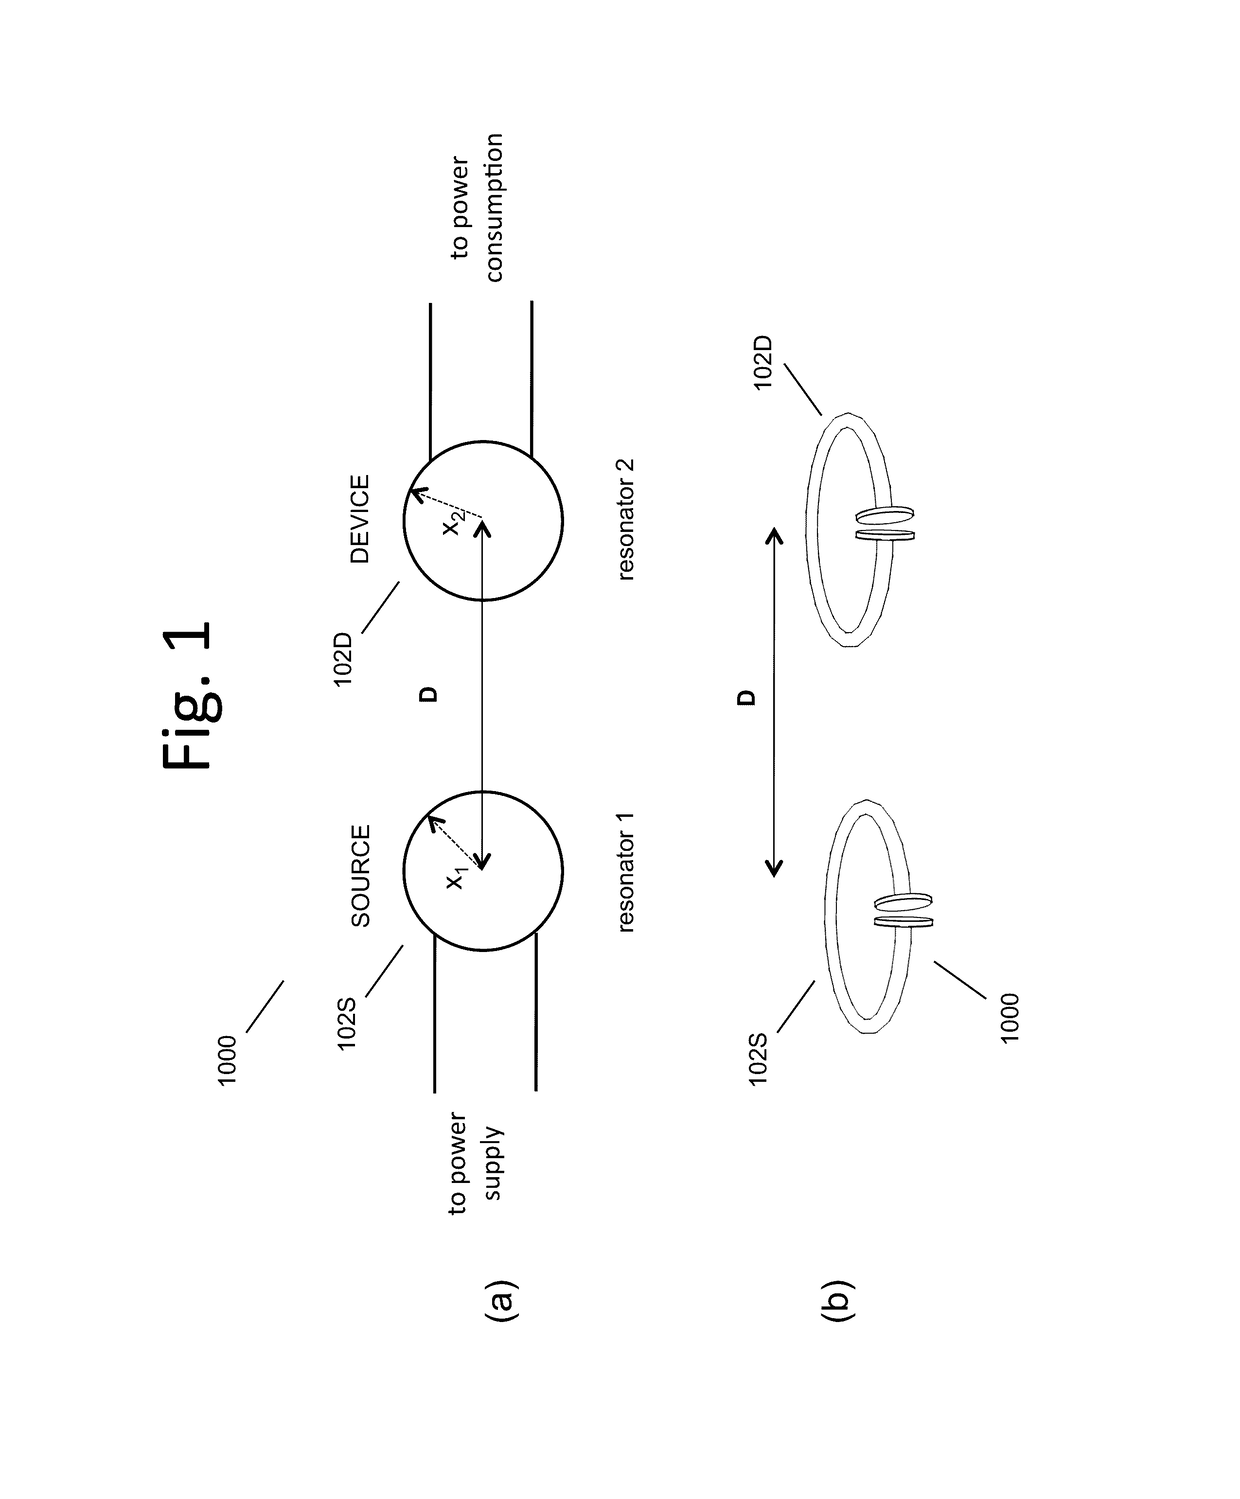 Wireless energy transfer using variable size resonators and systems monitoring